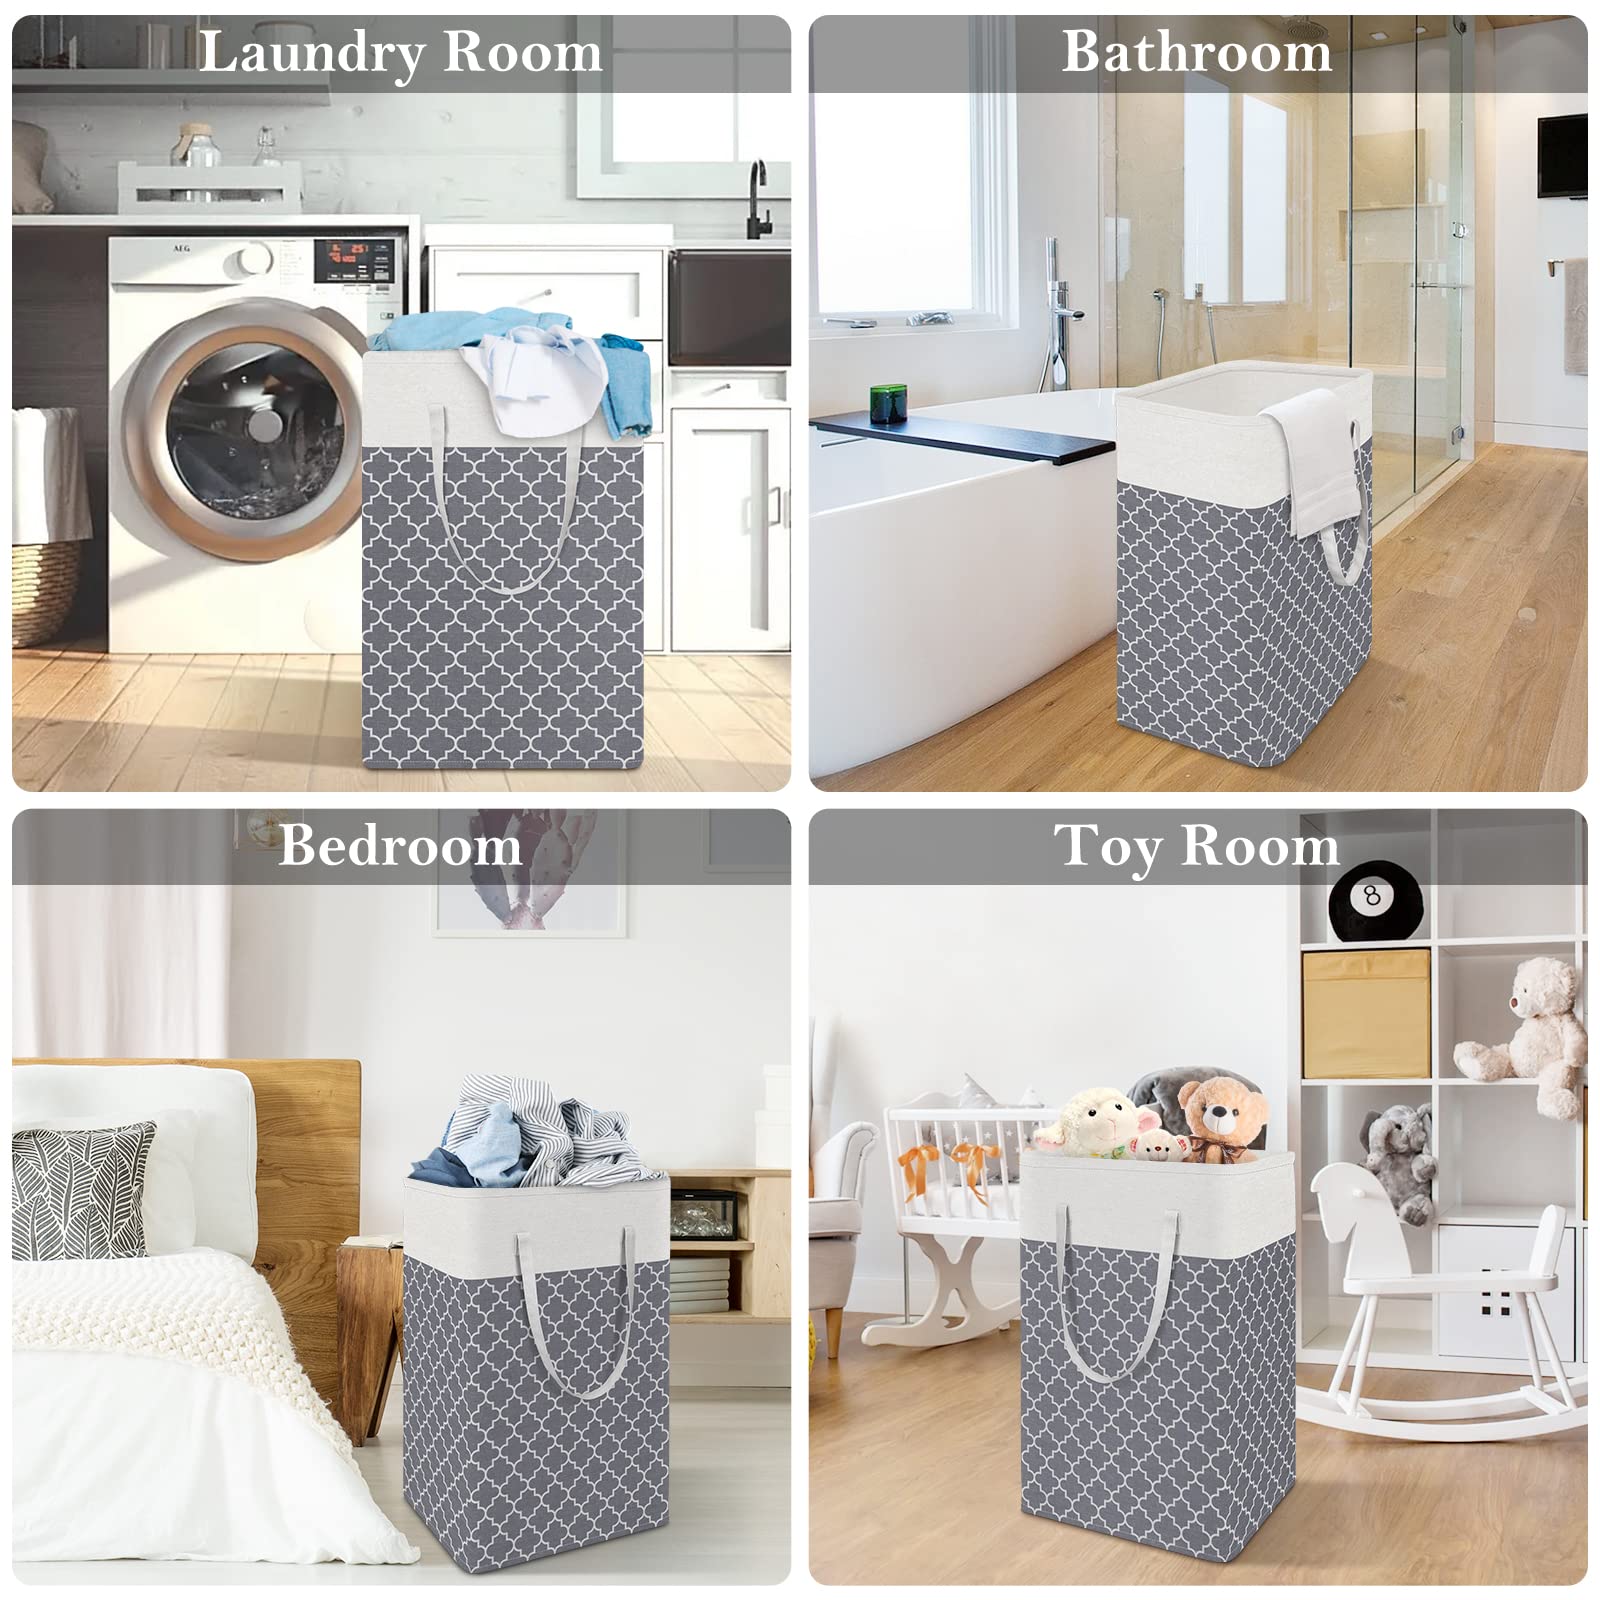 HomeHacks Laundry Baskets 2-Pack, Laundry Hamper with Long Handles, Collapsible Waterproof Clothes Hamper, Durable Tall Laundry Bin, Clothes Hamper for Bedroom, Bathroom, Dorm, Toys, 75L, Grey